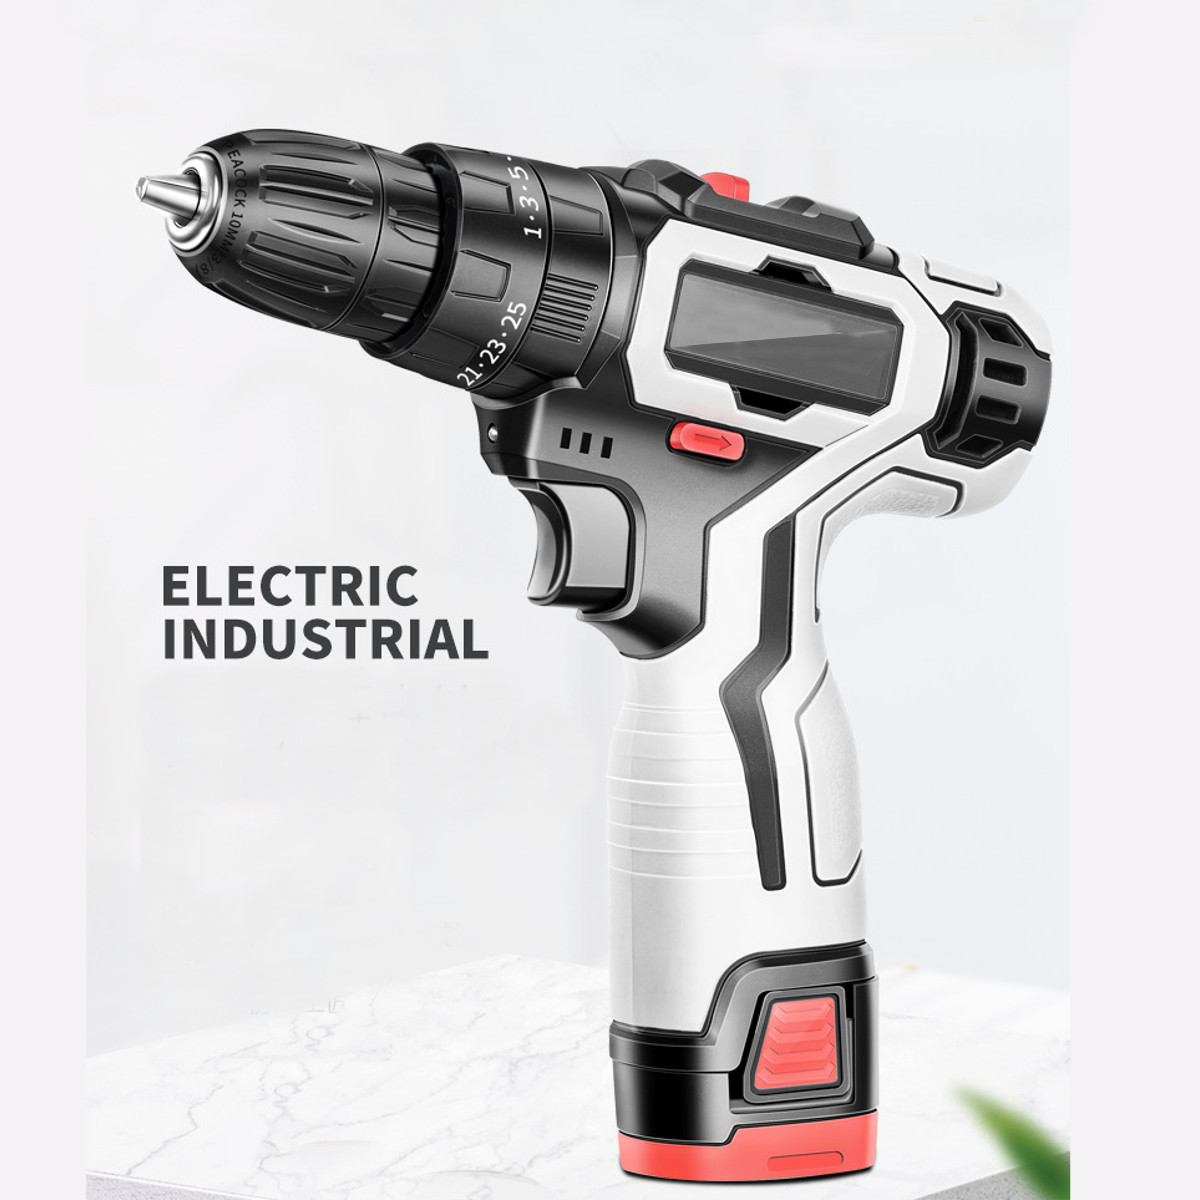 12V-1500mAH-25NM-Rechargeable-Cordless-Drill-2-Speeds-Electric-Screwdriver-Power-Tool-1736770-10